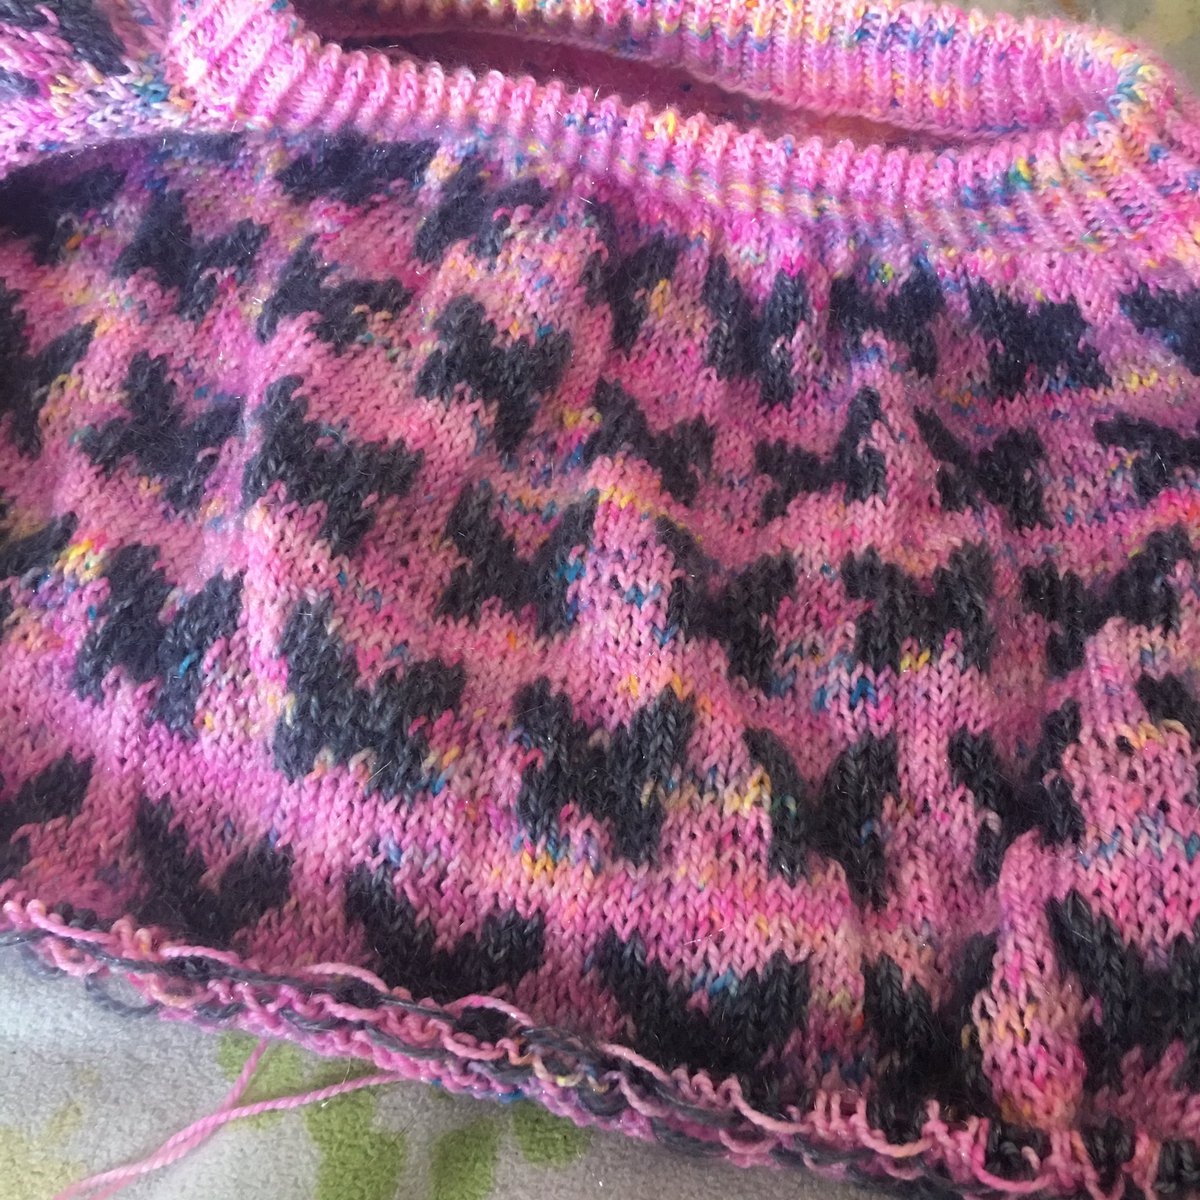 Making progress on my #HappyBluesSweater🦋 #TestKnit for @knitosophy for #WIPWednesdayOffRav & loving every stitch of it! The yarn I chose from #TheDiscreteUnicorn is just perfect & the mohair makes it light & airy 😁 

#OffRav #SizeInclusive #KnittingTwitter #SweaterKnitting 🦋